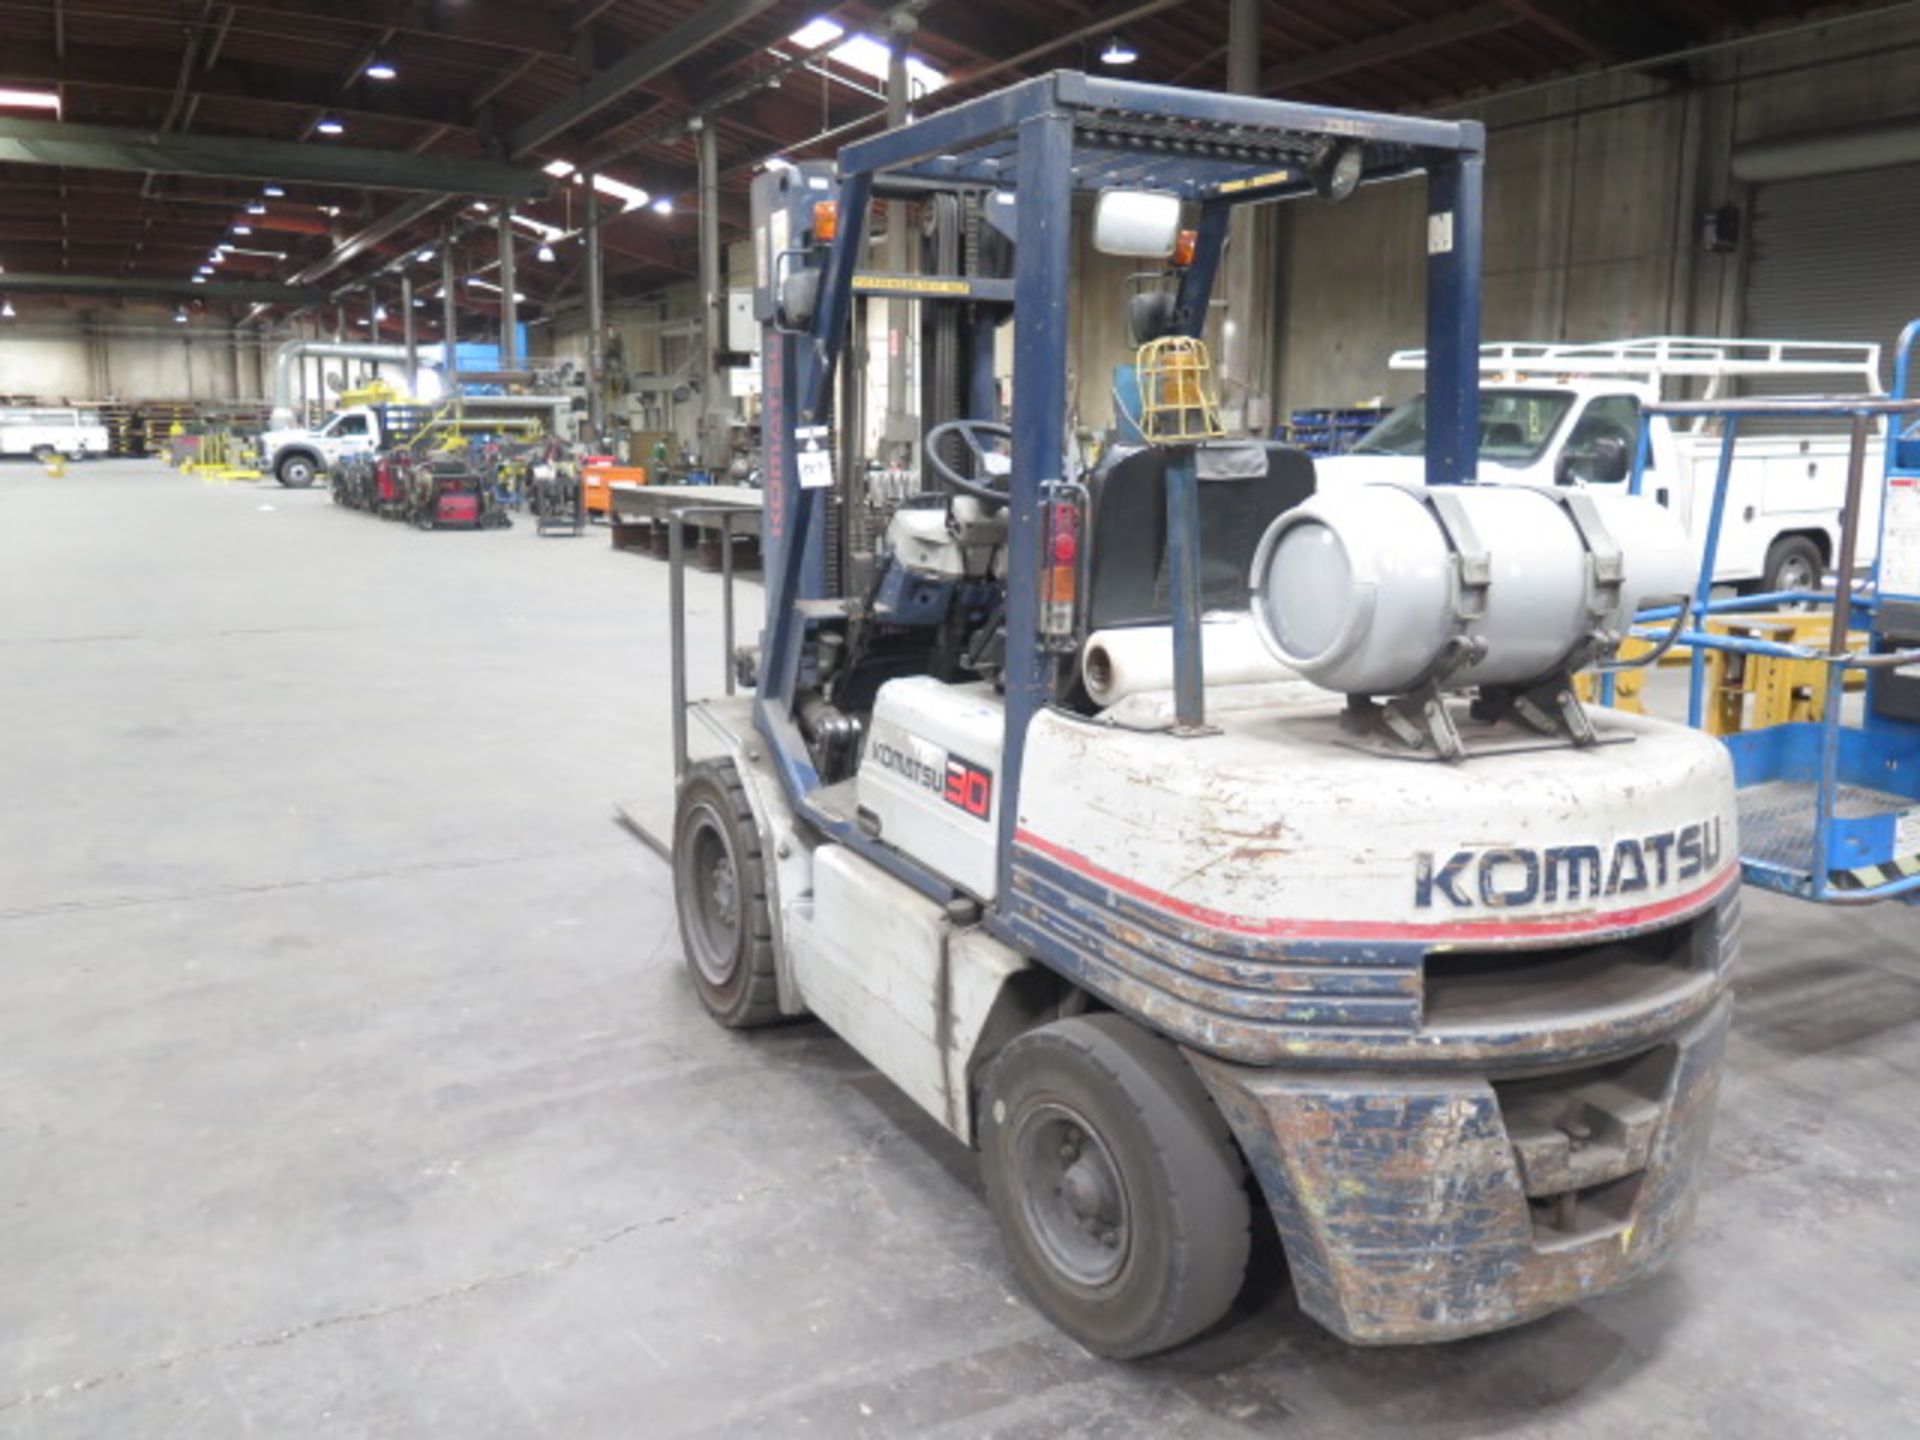 Komatsu FG30G II 4780 Lb LPG Forklift s/n 490203A w/ 3-Stage Mast, 183” Lift Side Shift, SOLD AS IS - Image 2 of 14